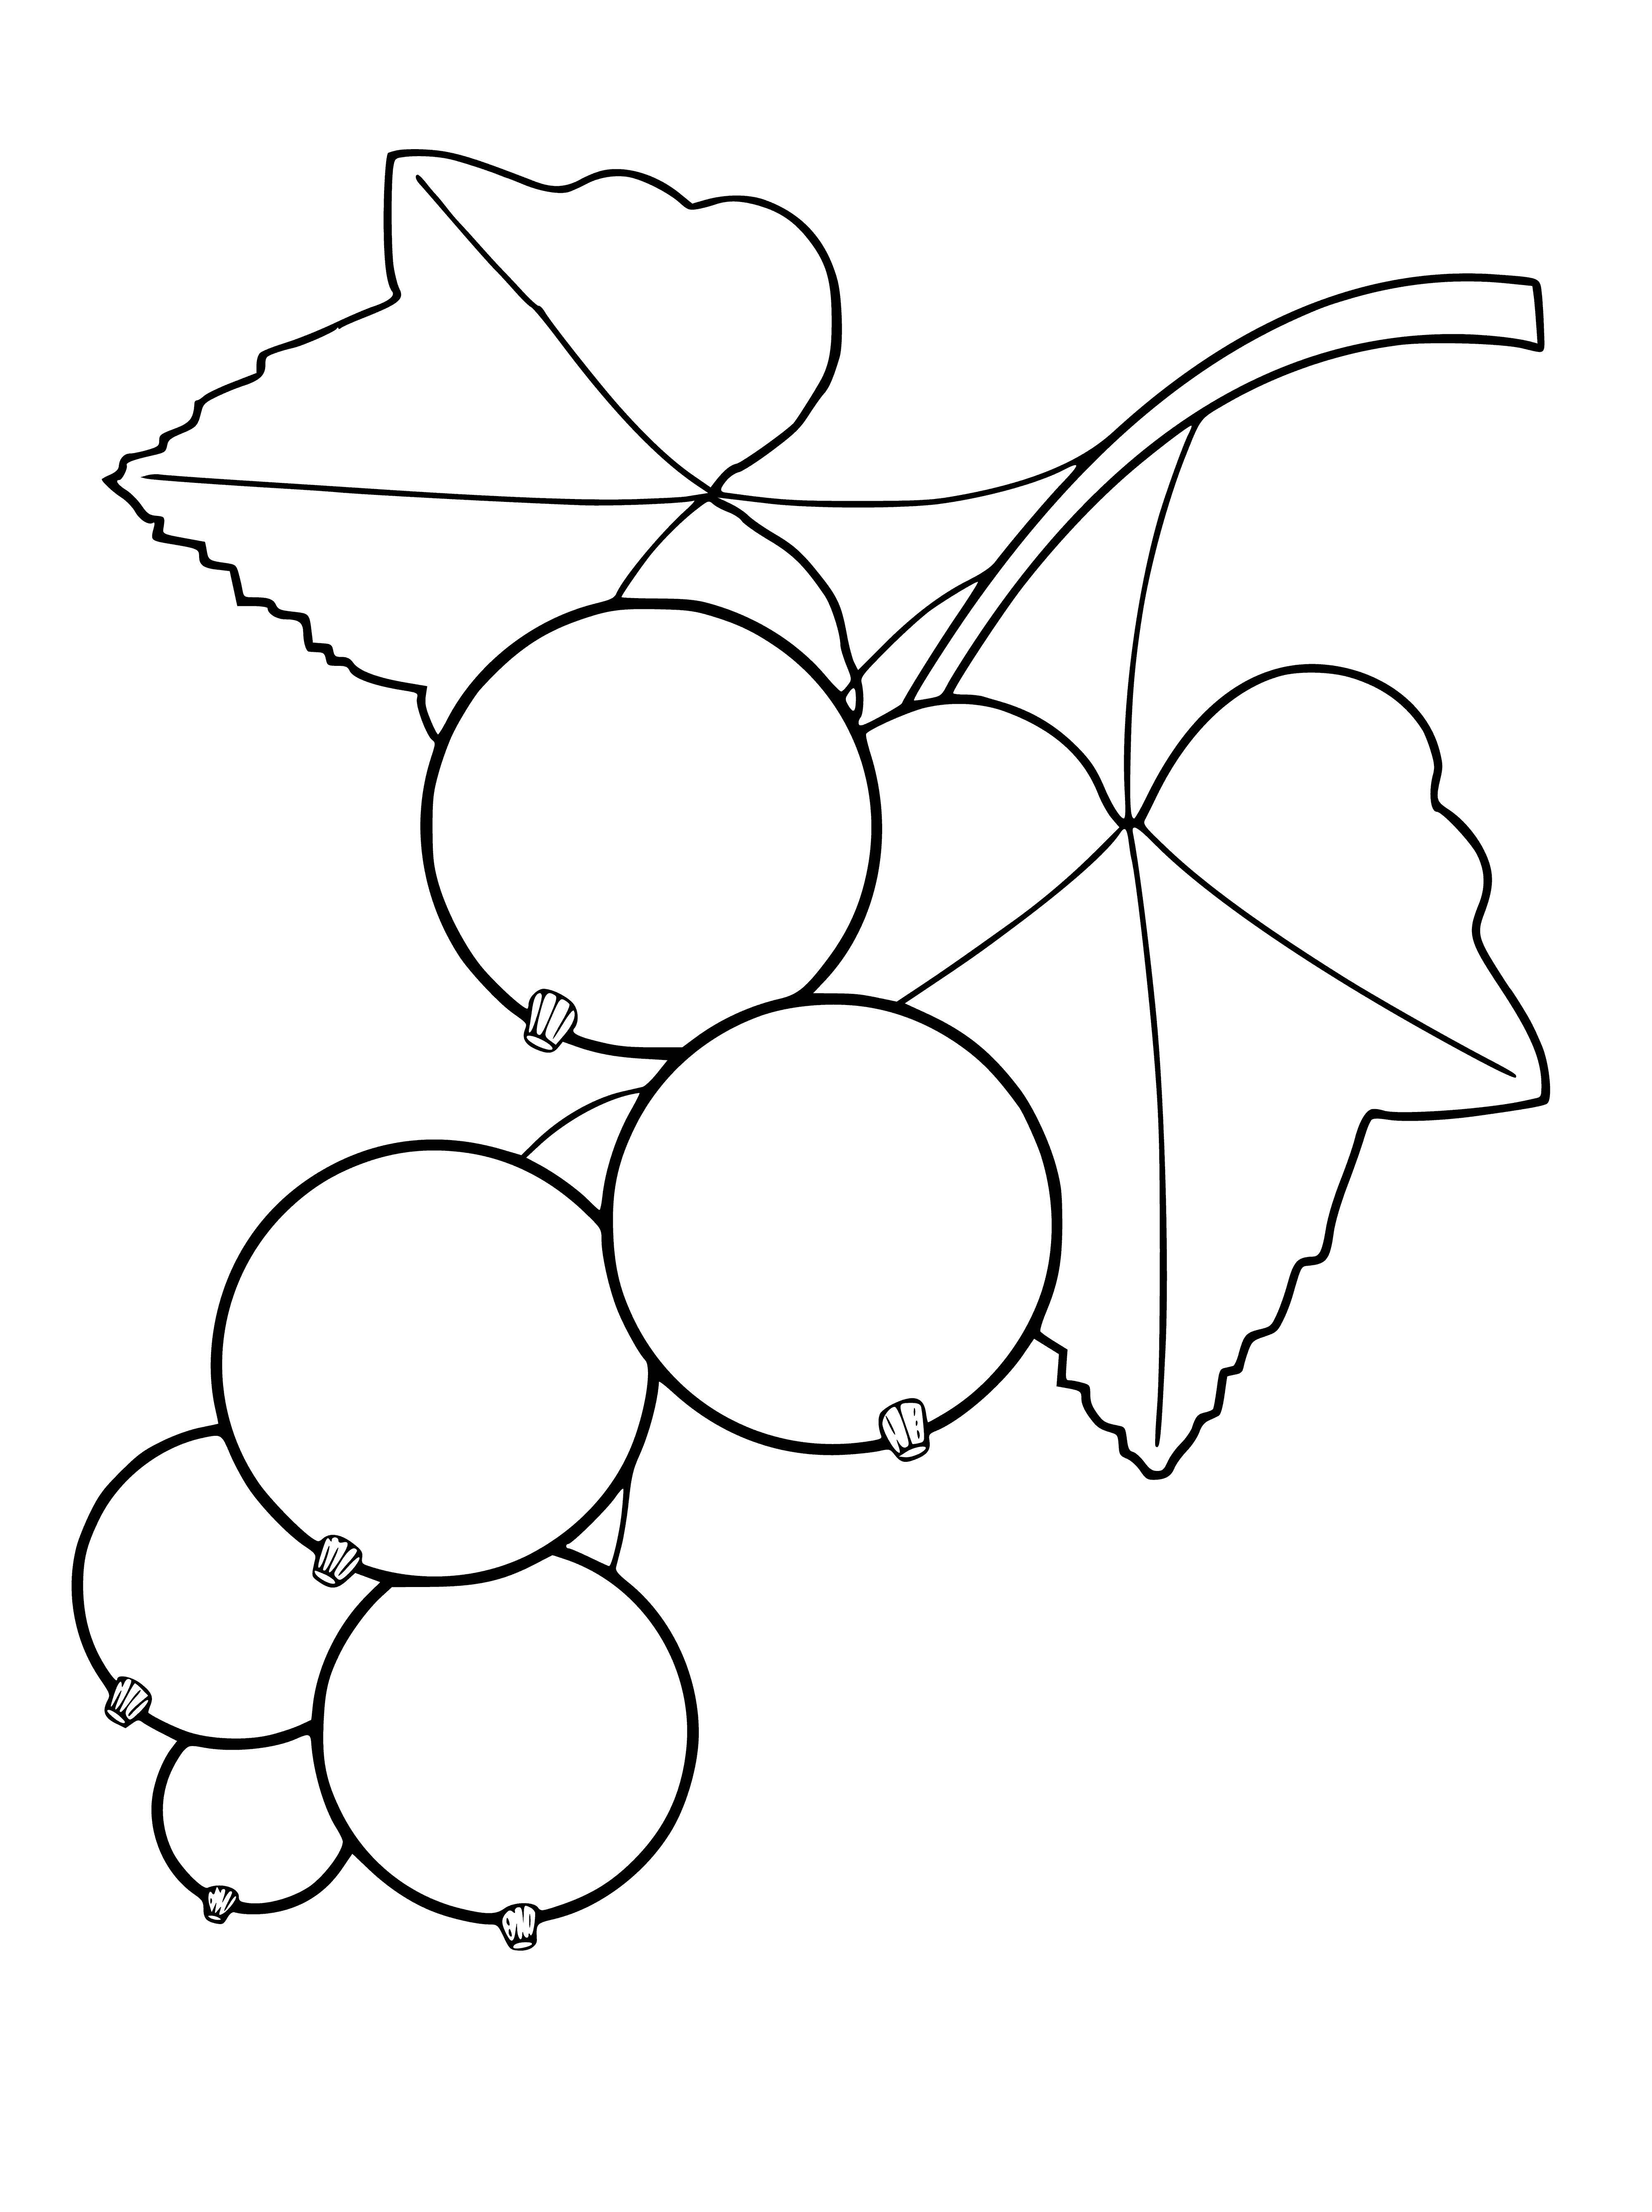 coloring page: Currants are small, round fruits that come in black, red, or white. Used for jams, jellies, and baked goods.